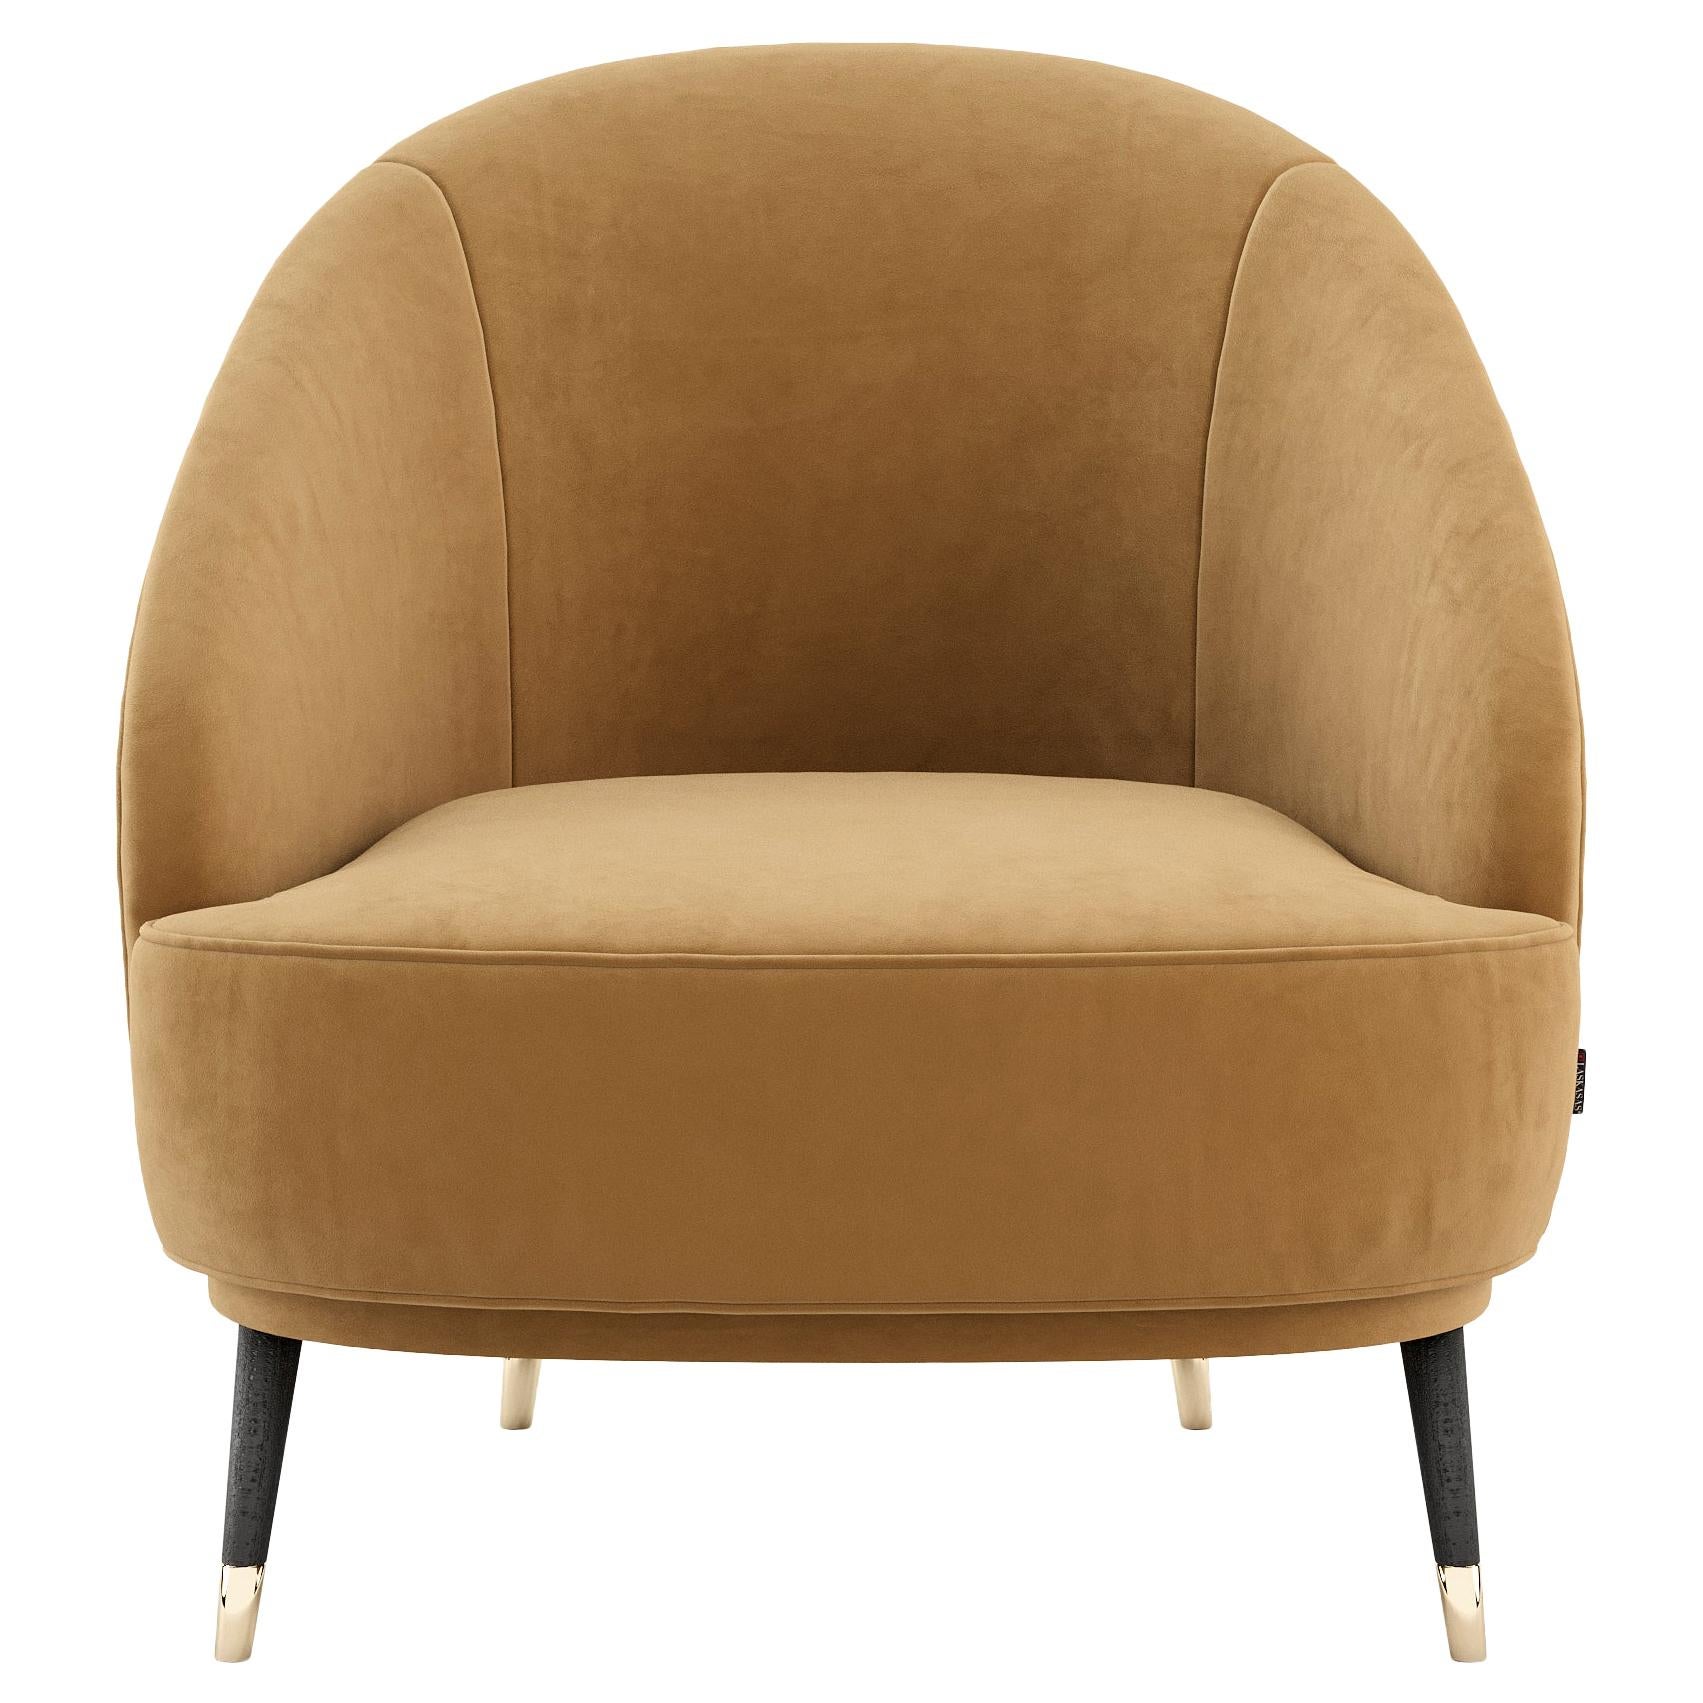 Hector Armchair, Portuguese 21st Century Contemporary Upholstered with Leather